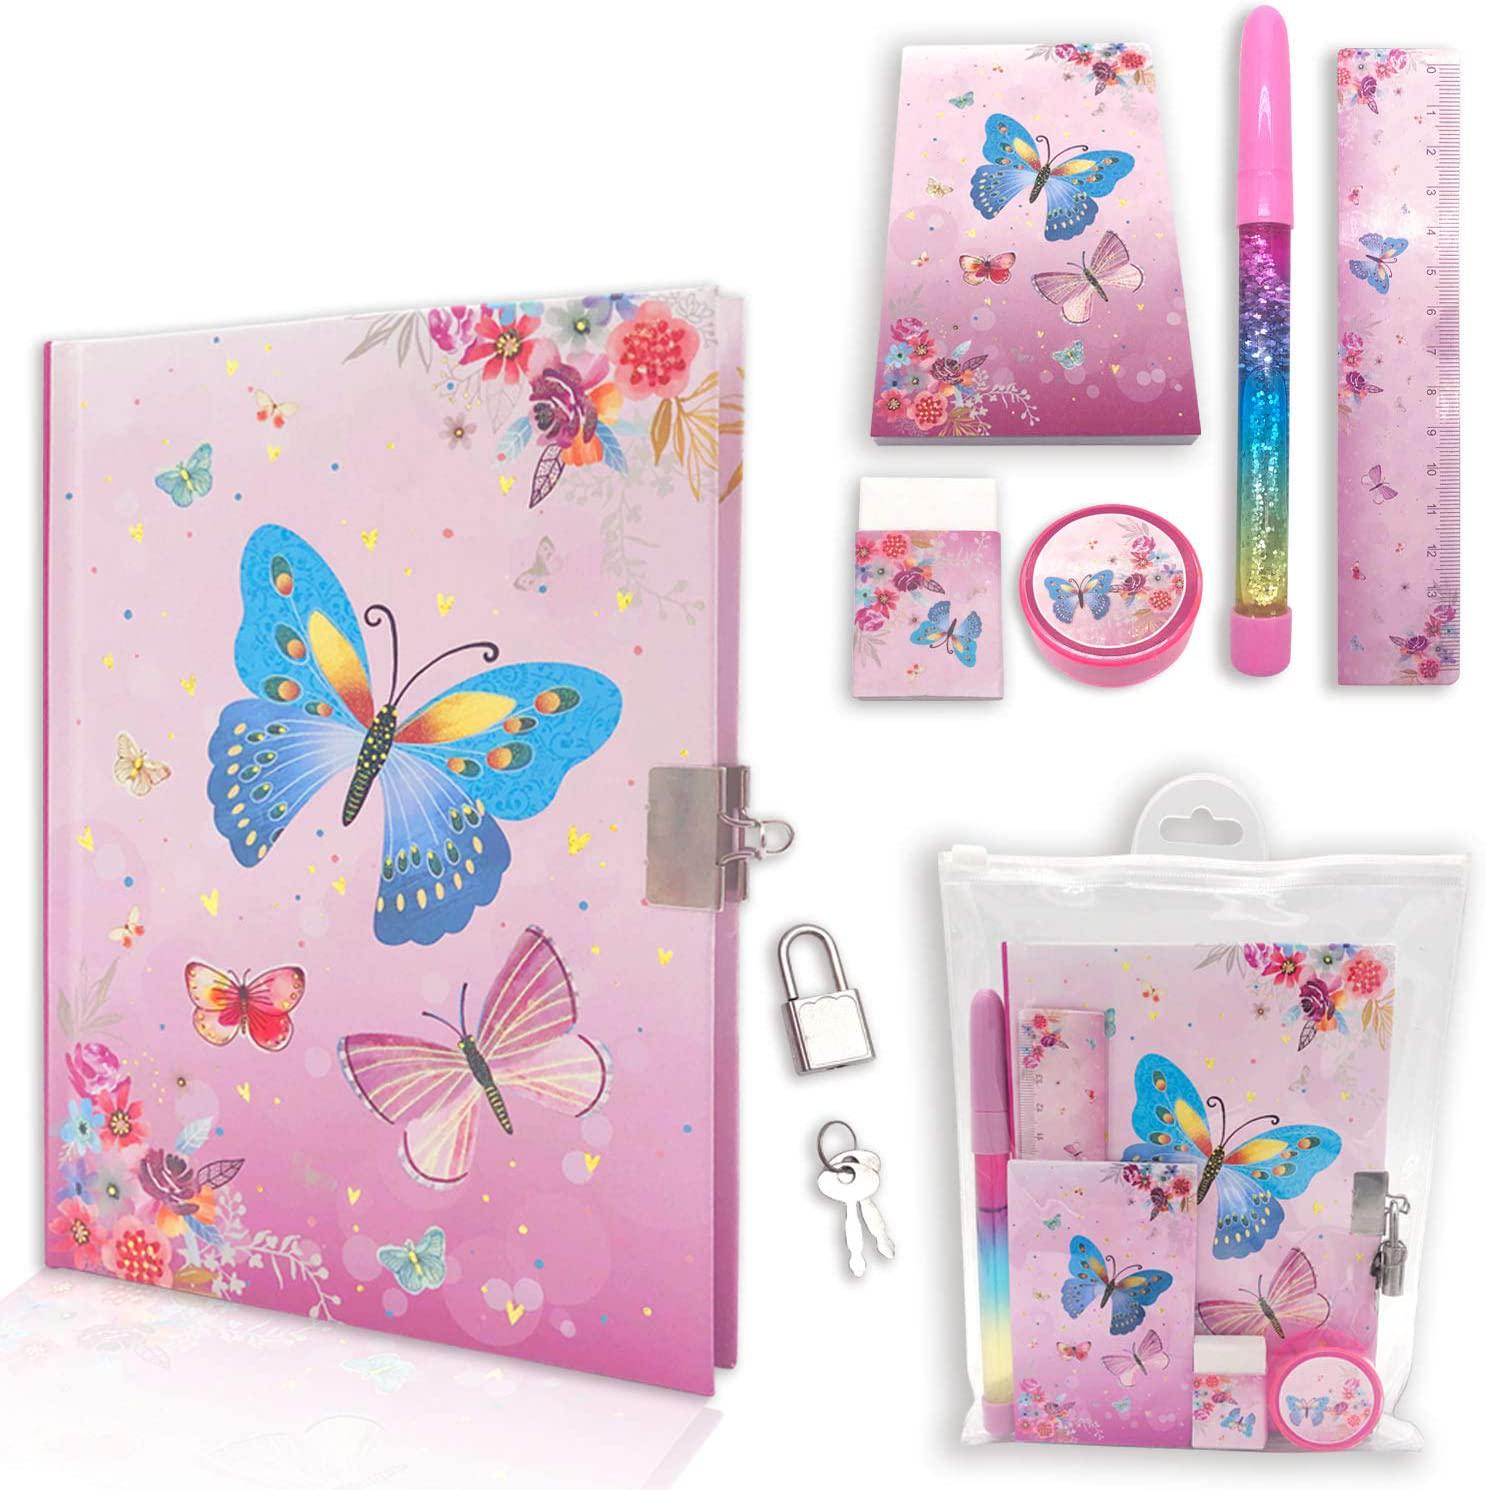 GINMLYDA, Girls Diary with Lock for Kids, Girls Journal School Gift Set with 7.1x5.3 Inches Notebook Memo Pad Multicolored Pen Ruler Sharpener Eraser (Butterfly)